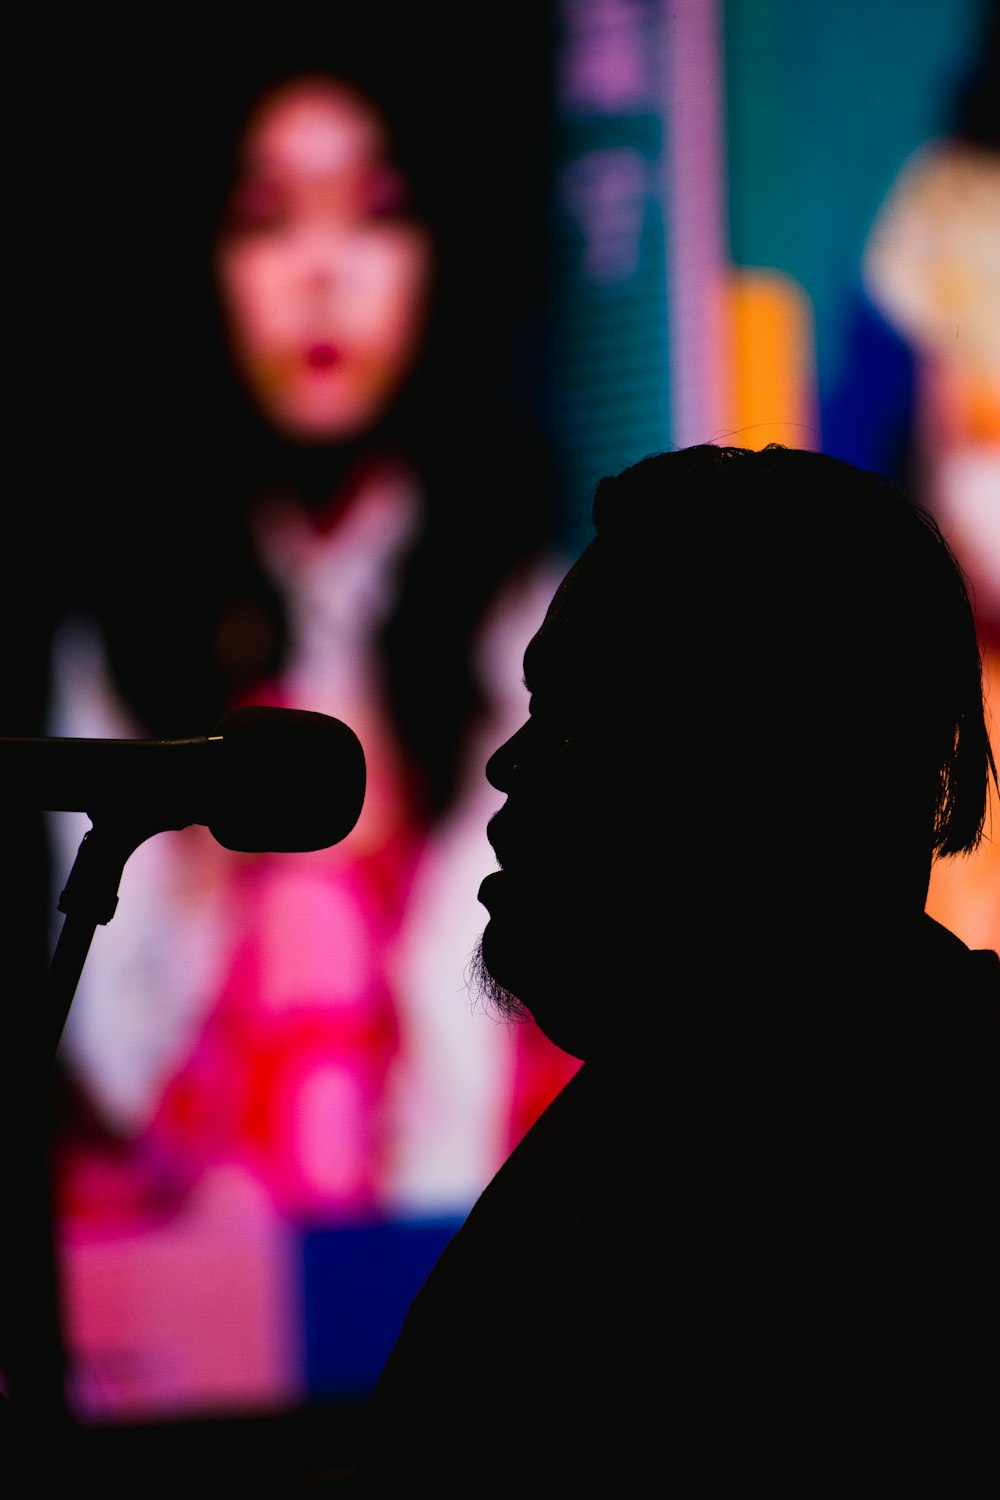 silhouette photography of man in front of a microphone